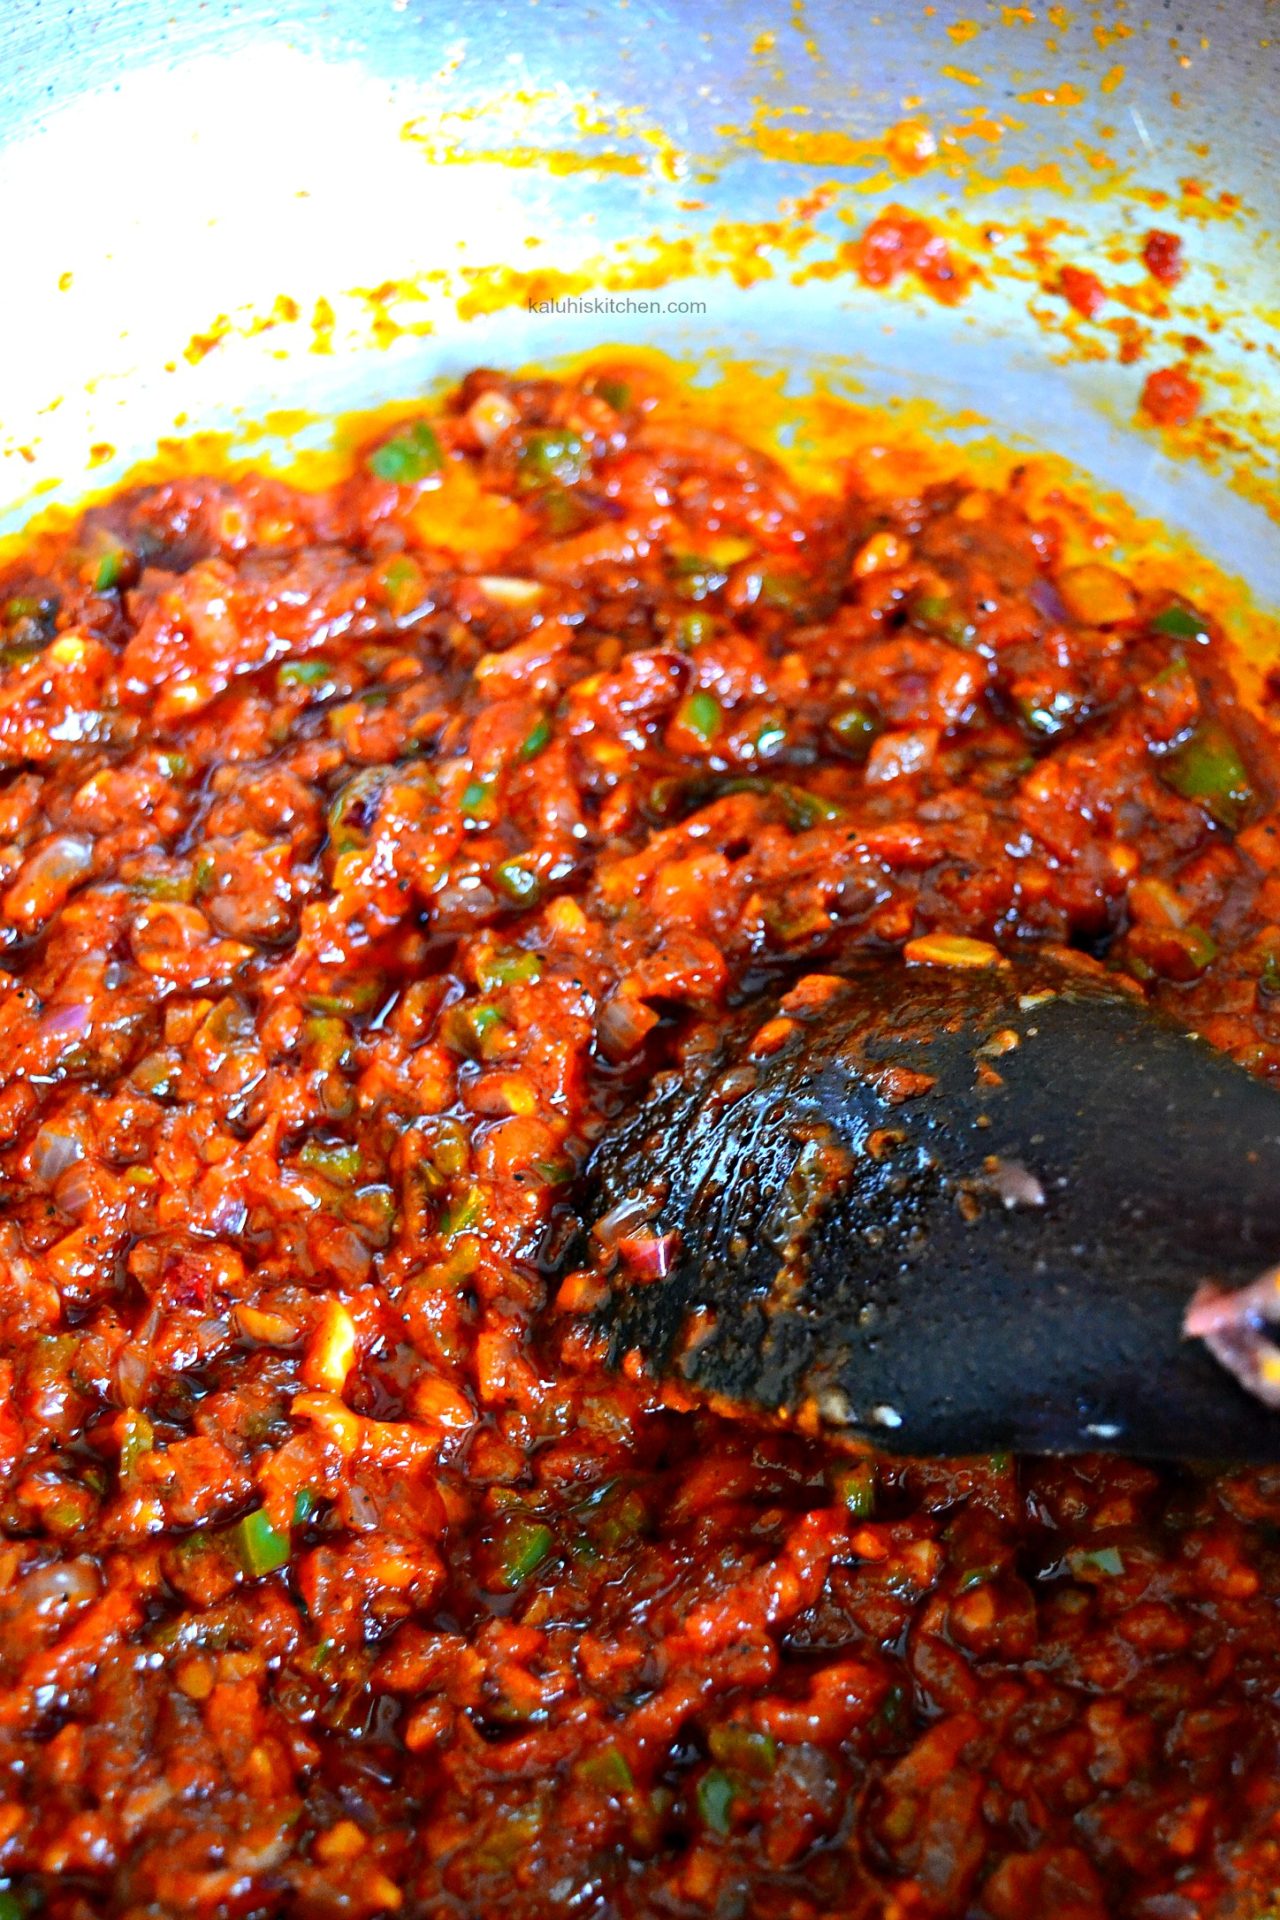 cook down your tomatoes together with the spices and the tomato paste until it forms a nice thick paste_garlic paprika liver_kaluhiskitchen.com